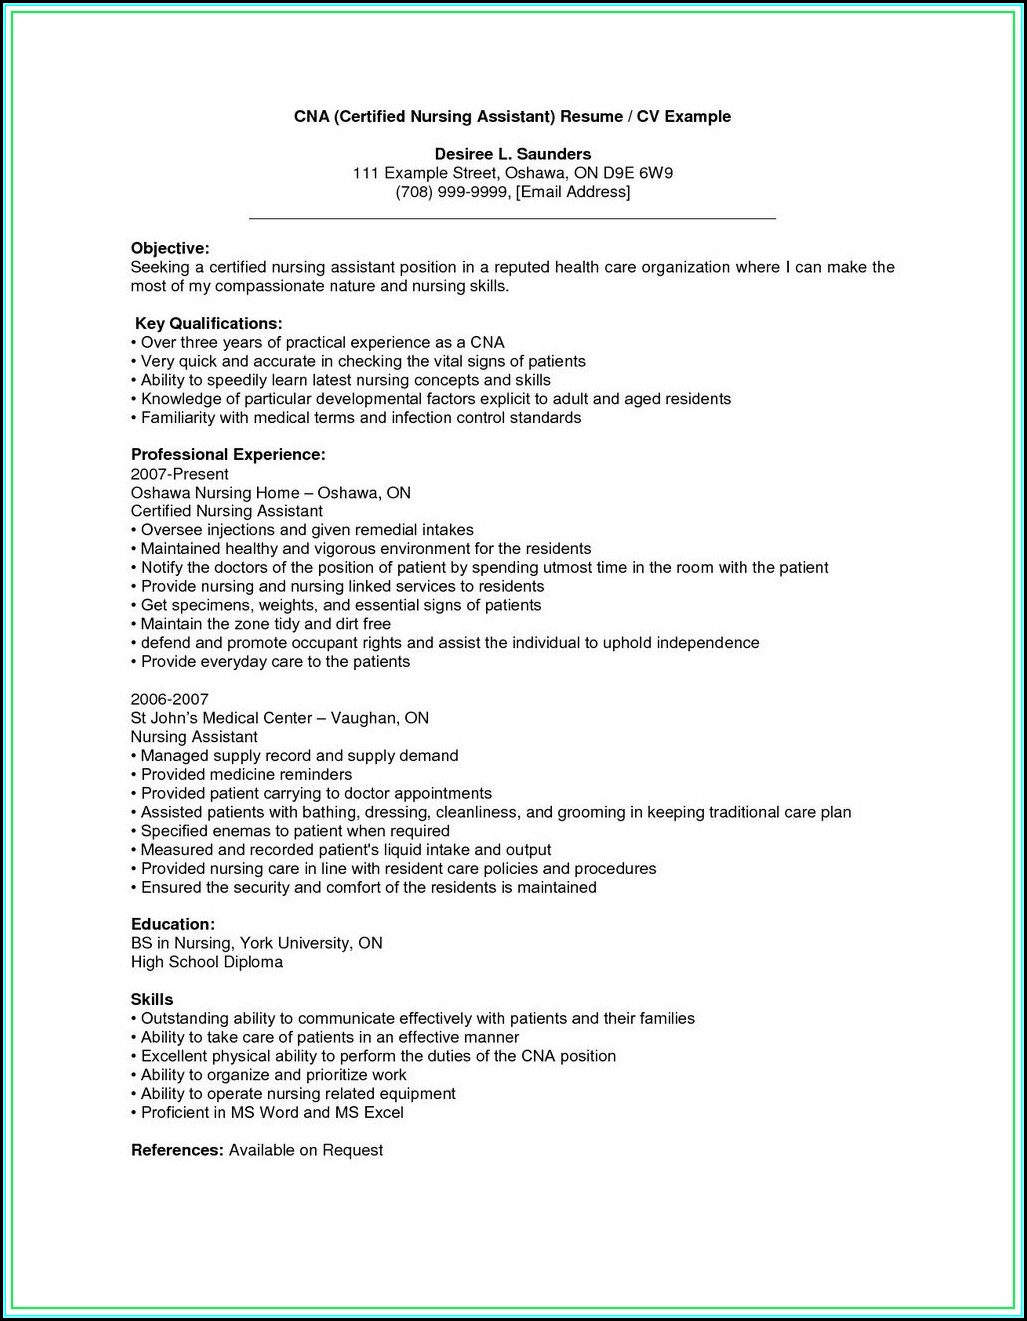 Sample Resume For Nursing Assistant With No Experience